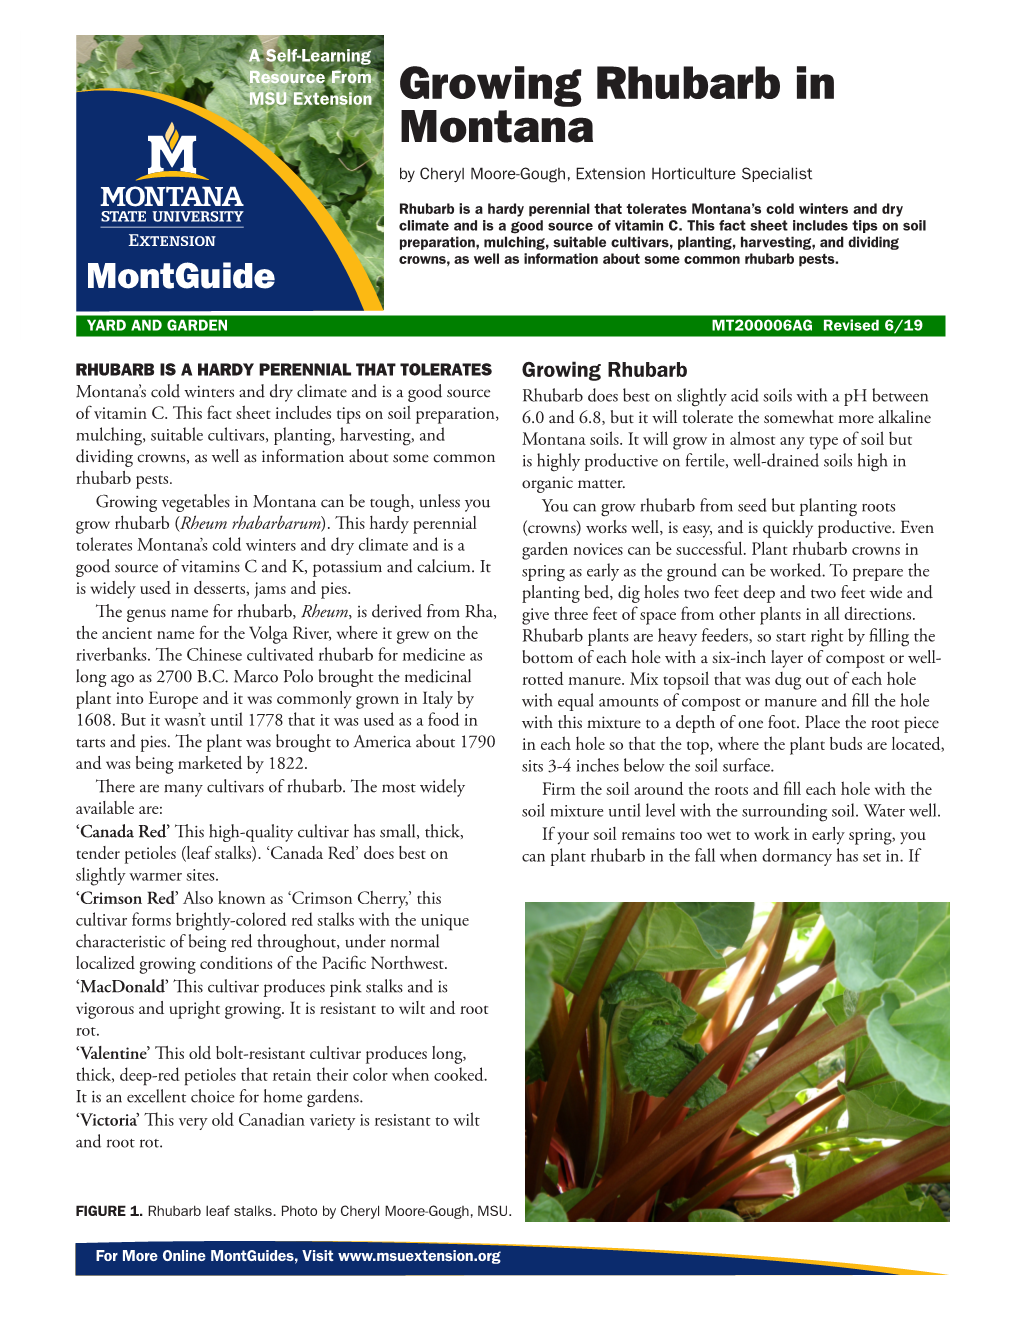 Growing Rhubarb in Montana by Cheryl Moore-Gough, Extension Horticulture Specialist